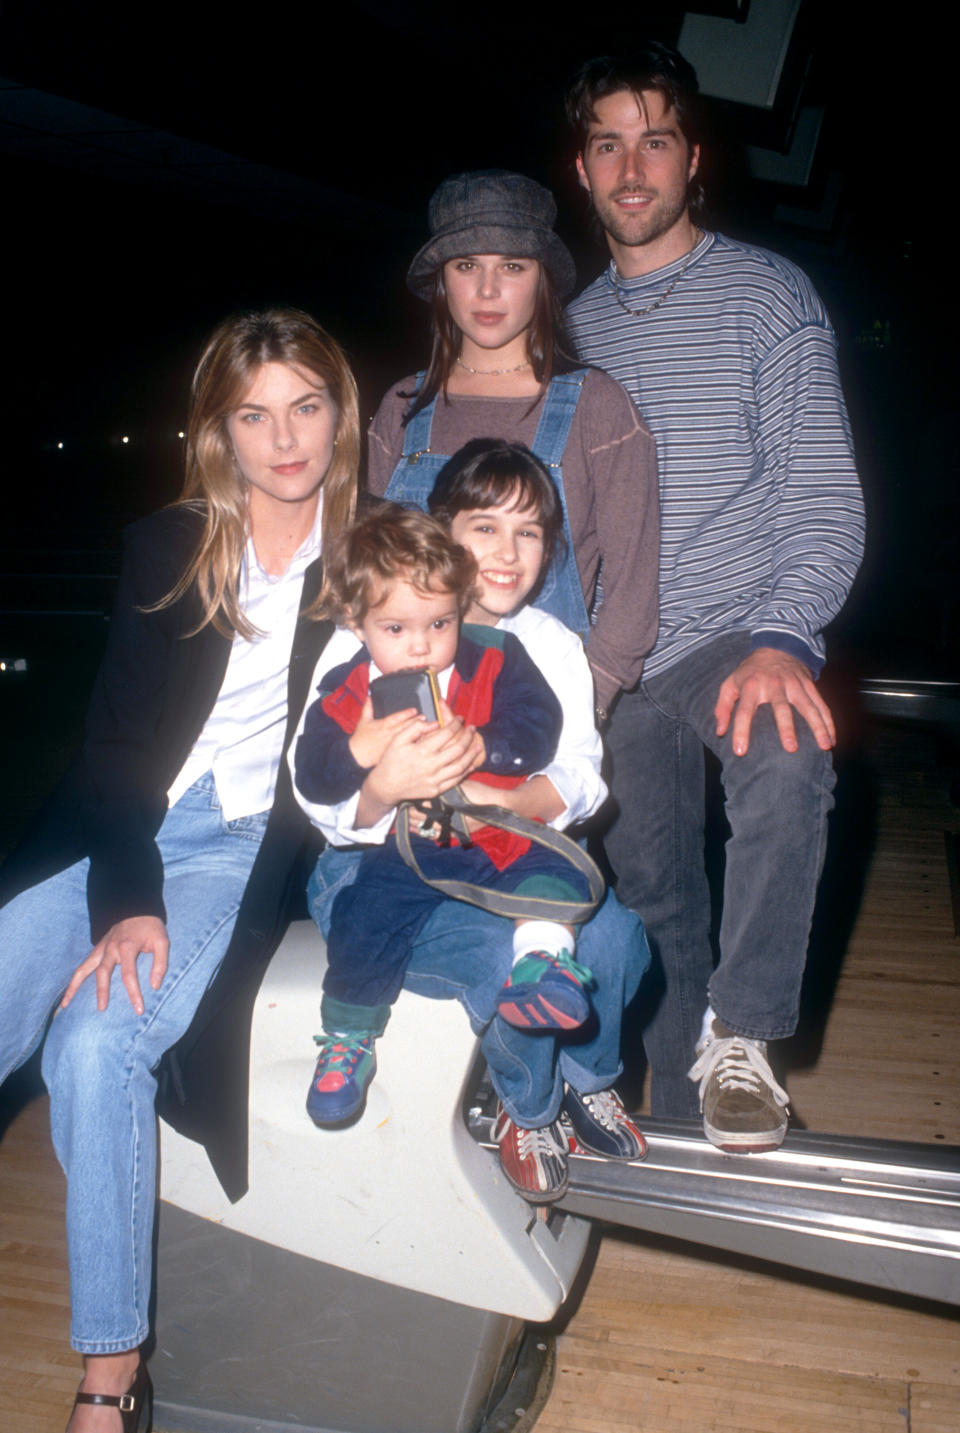 LOS ANGELES, CA - 1996: (L-R) Actress Paula Devicq, actress Neve Campbell, actor Matthew Fox and actress Lacey Chabert, the cast of 